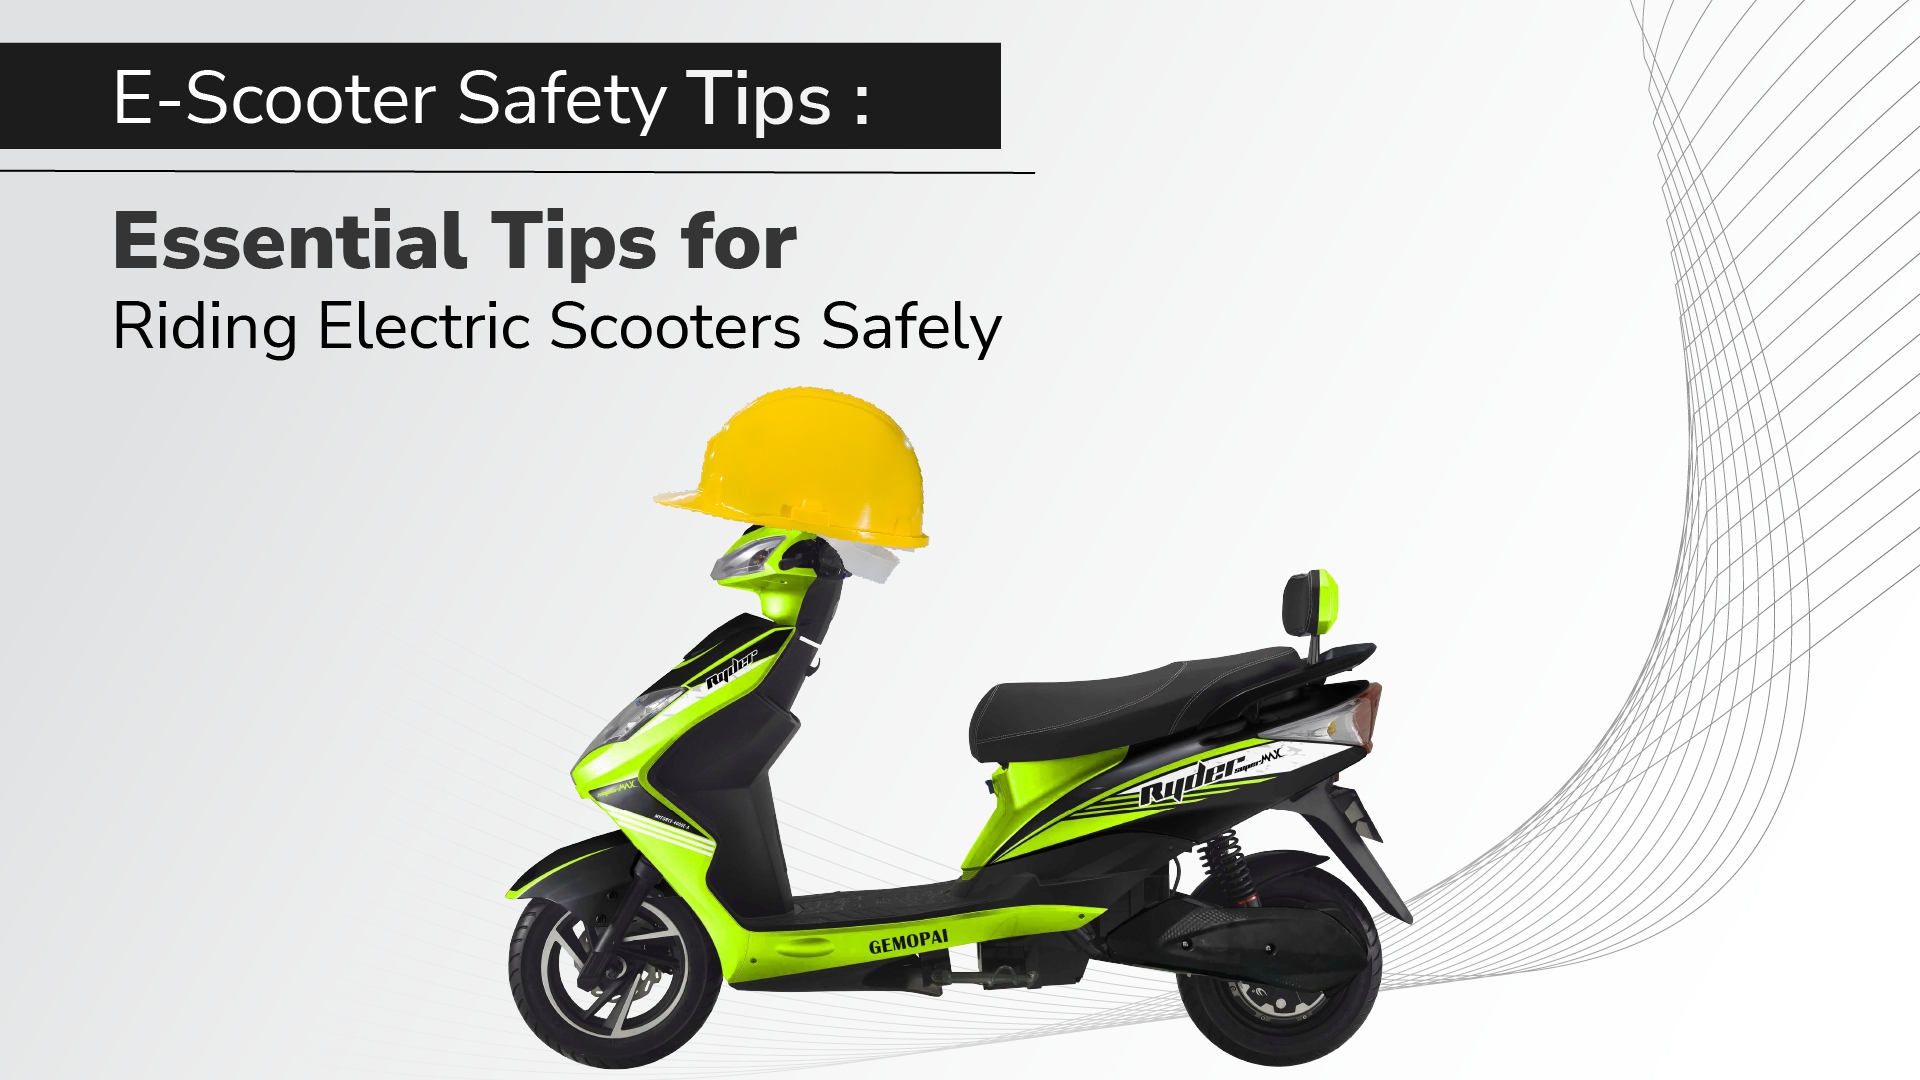 Electric Scooter Safety Tips: Tips for Riding Electric Scooters Safely